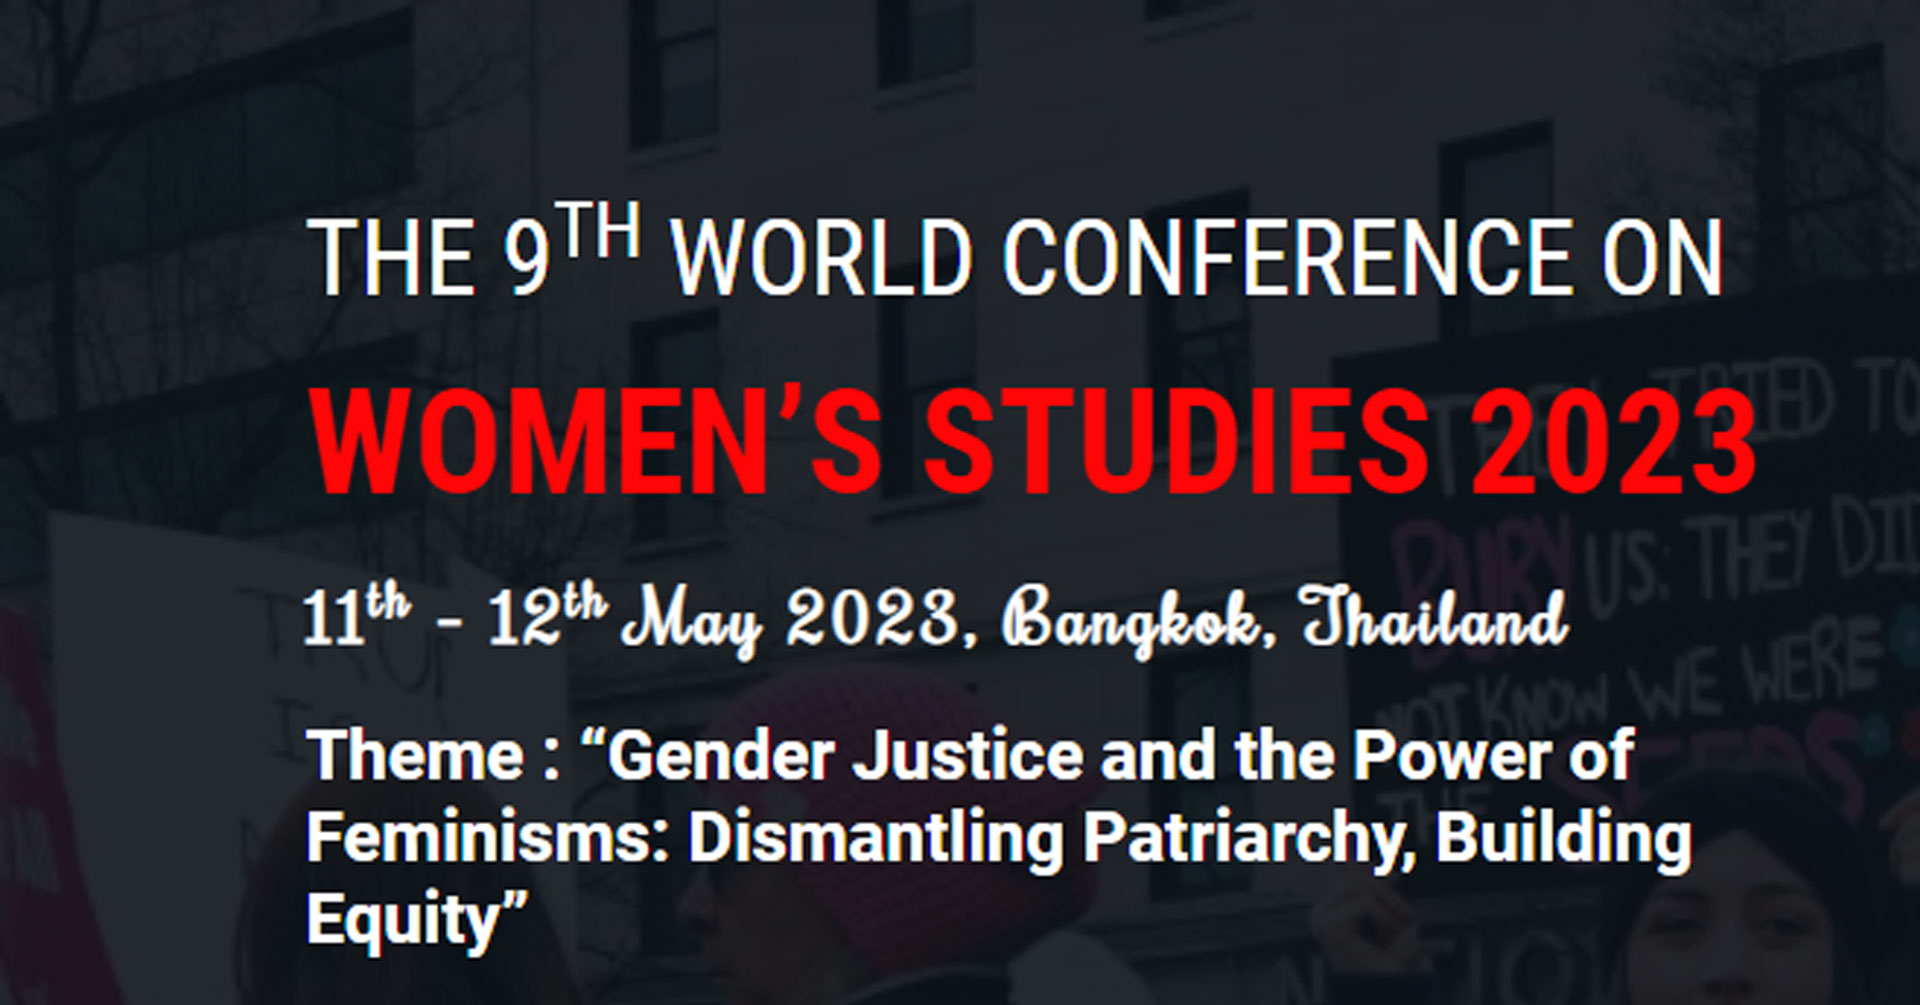 The 9th World Conference on Women’s Studies 2023, Central Thailand, Bangkok, Thailand